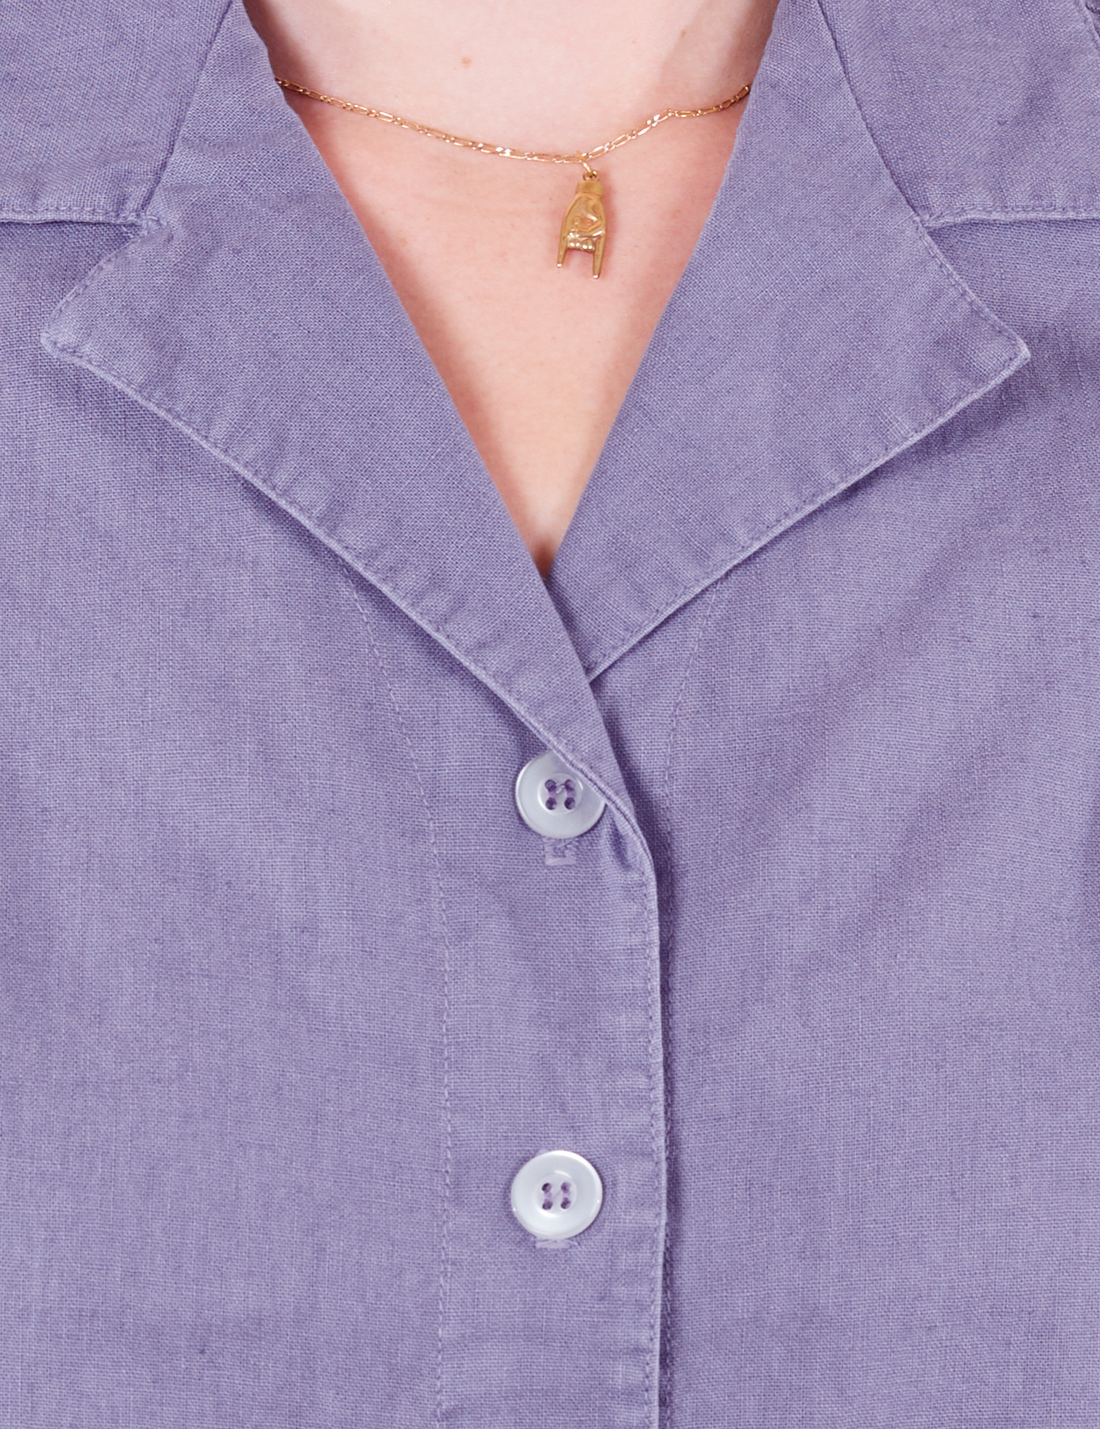 Pantry Button-Up in Faded Grape close up buttons and collar view